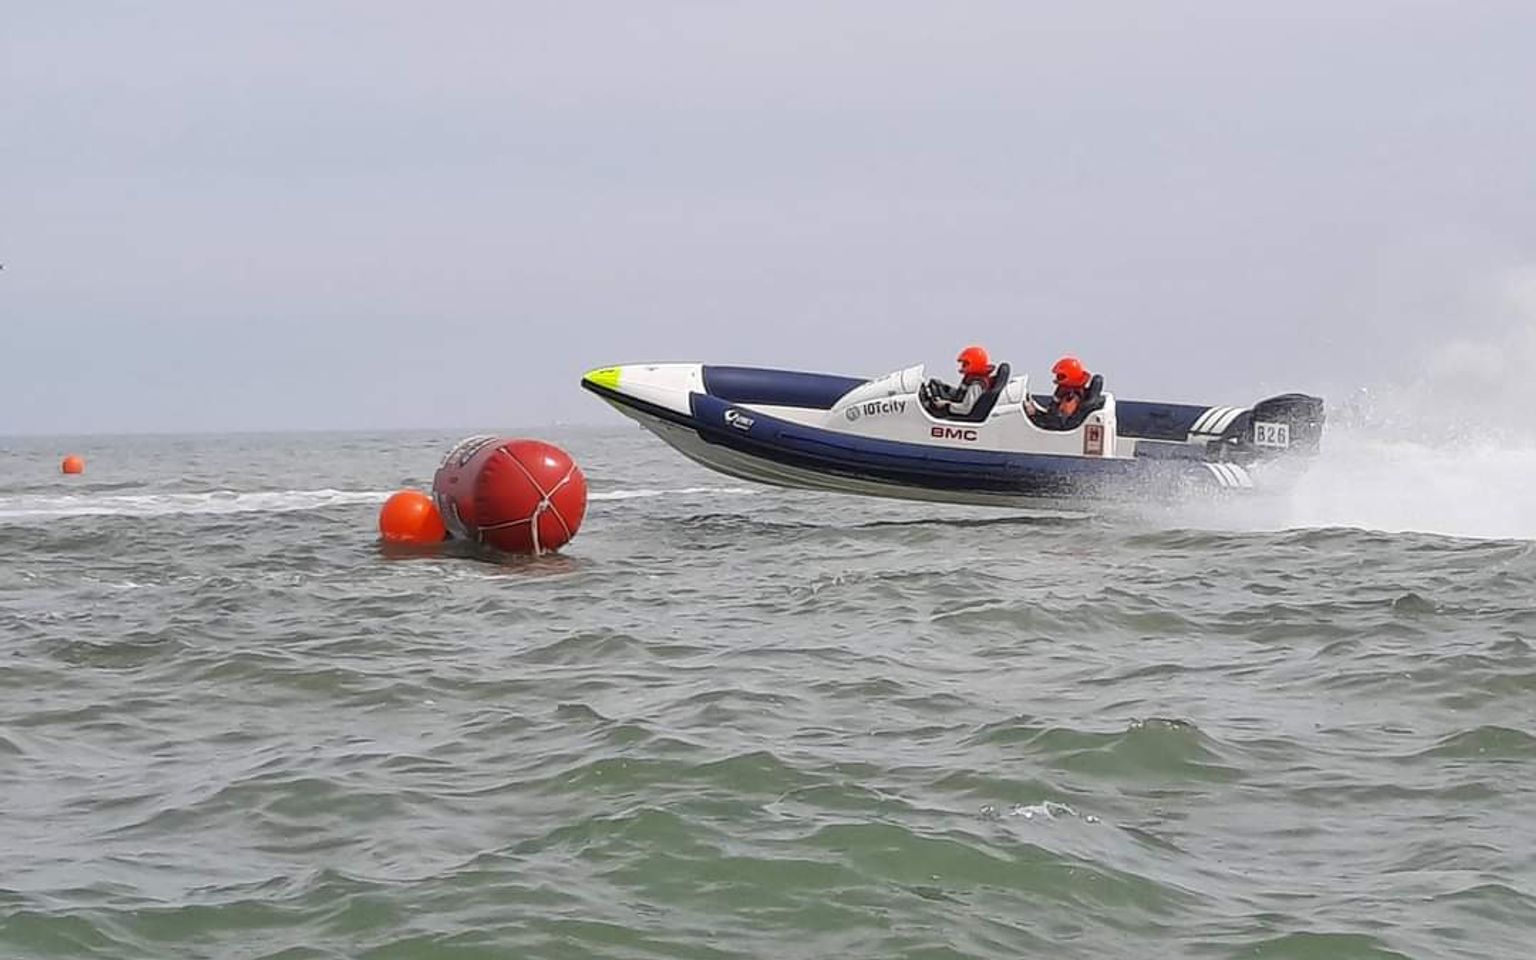 Position after the first buoy